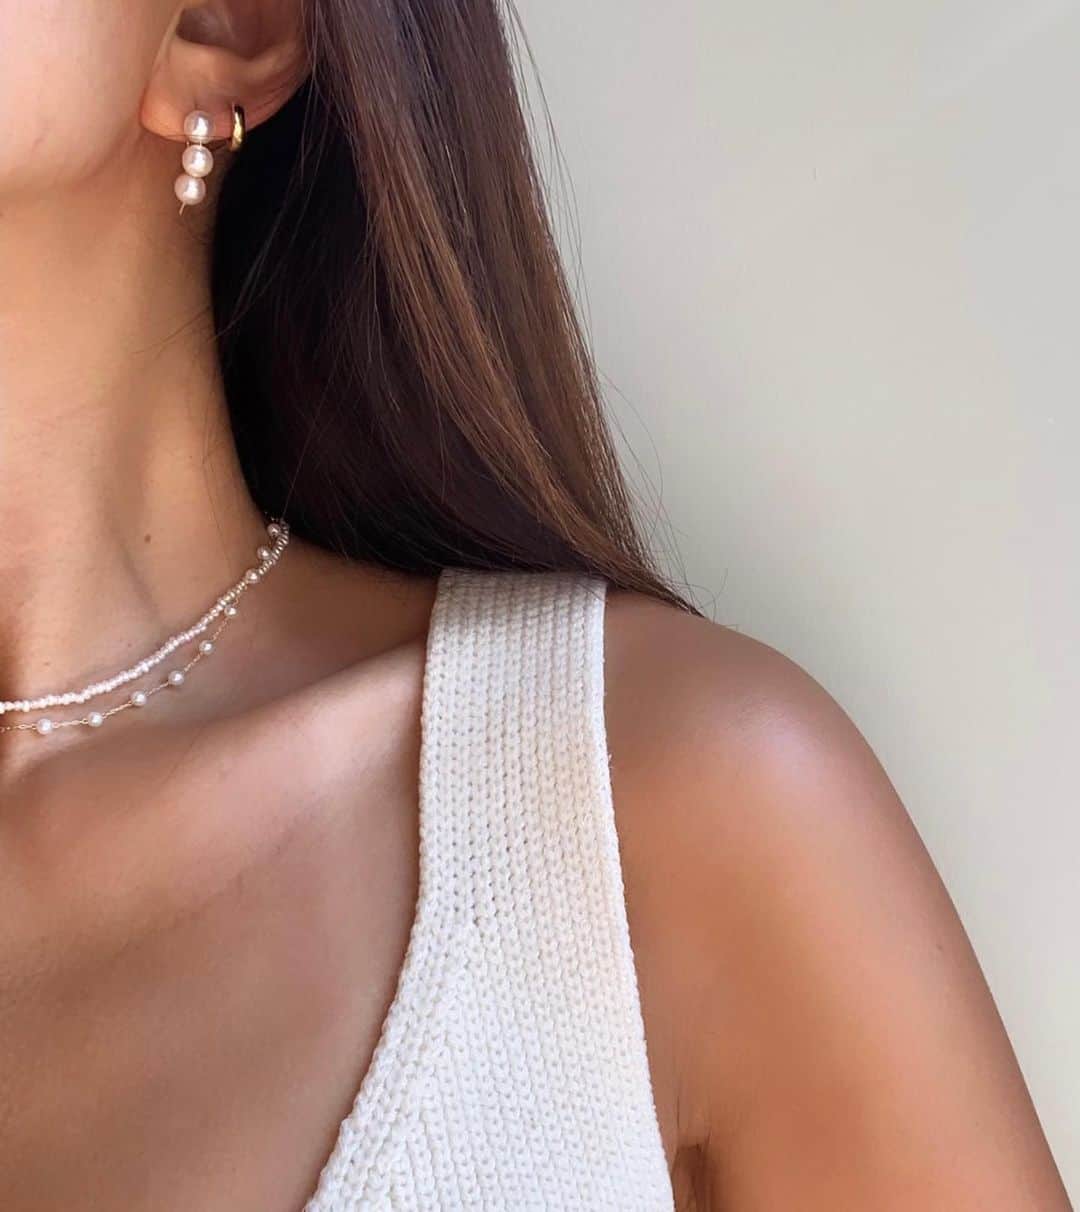 M I Z U K Iのインスタグラム：「Most Loved 💕  Shop MIZUKI’s Most Loved Pearls on www.mizukijewels.com  #mizuki #mizukijewels #mizukijewelry #seaofbeauty #essentials #pearls #modernpearls #safetypin  #earrings #most  #loved」